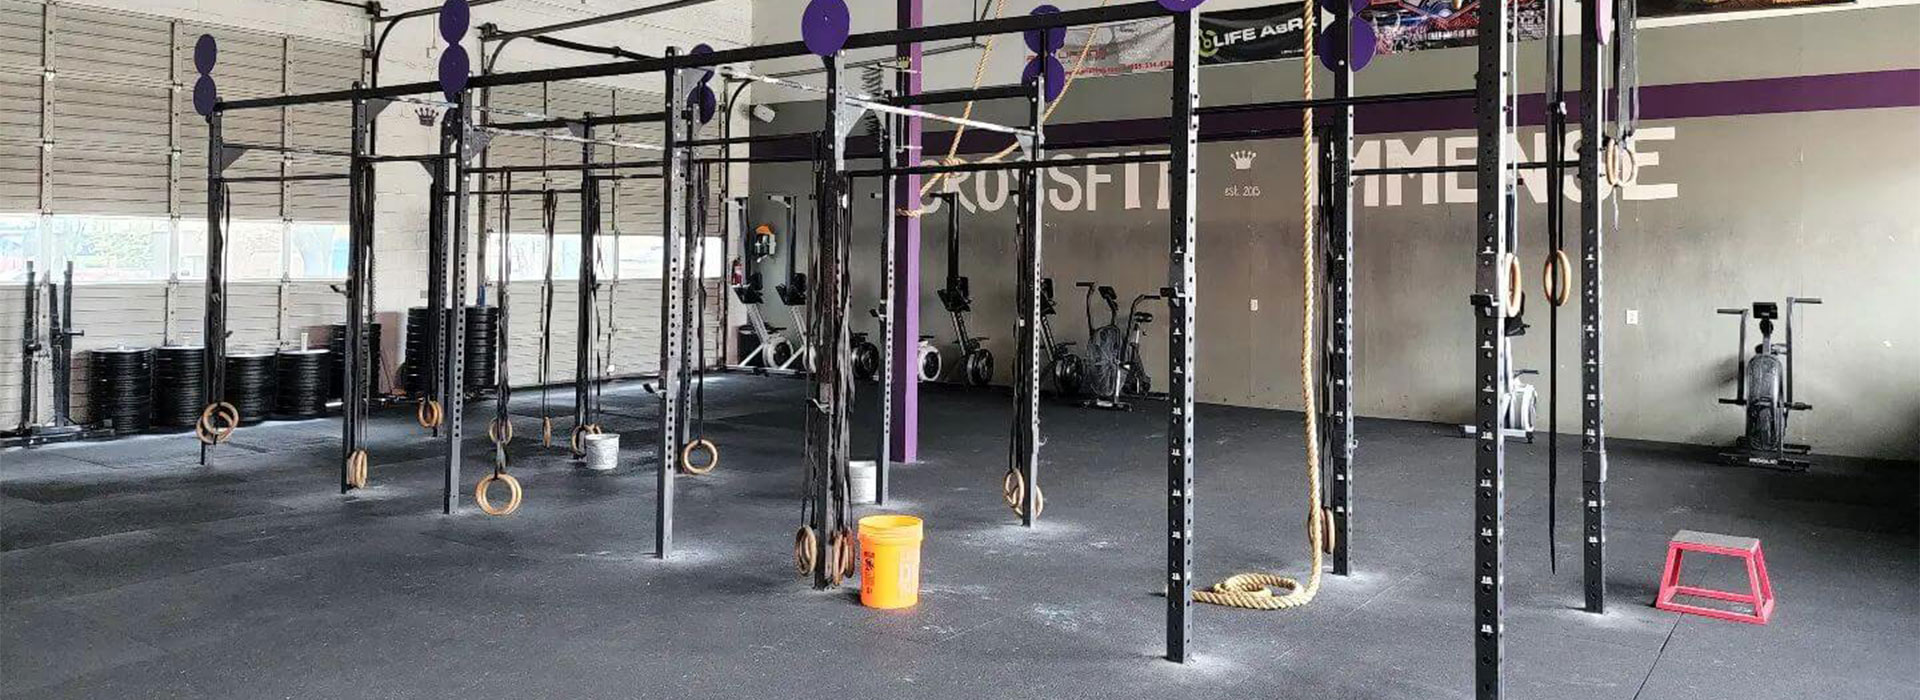 A CrossFit Gym Near Milwaukie That Can Help With Weight Loss & Dieting